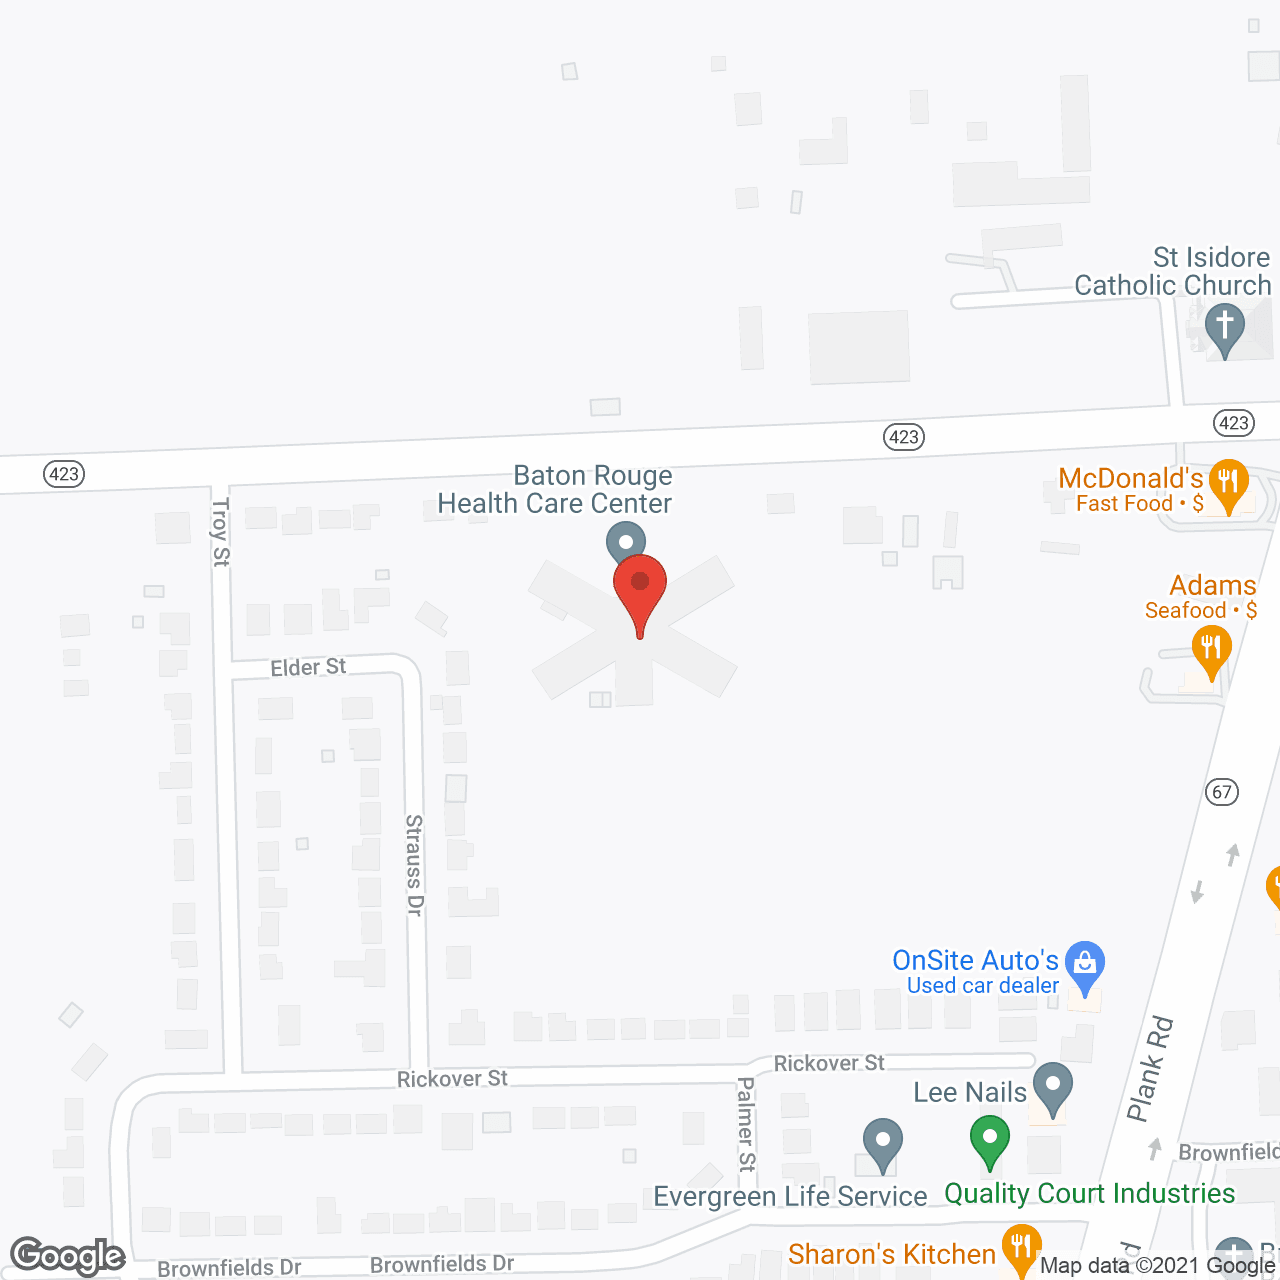 Baton Rouge Health Care Ctr in google map